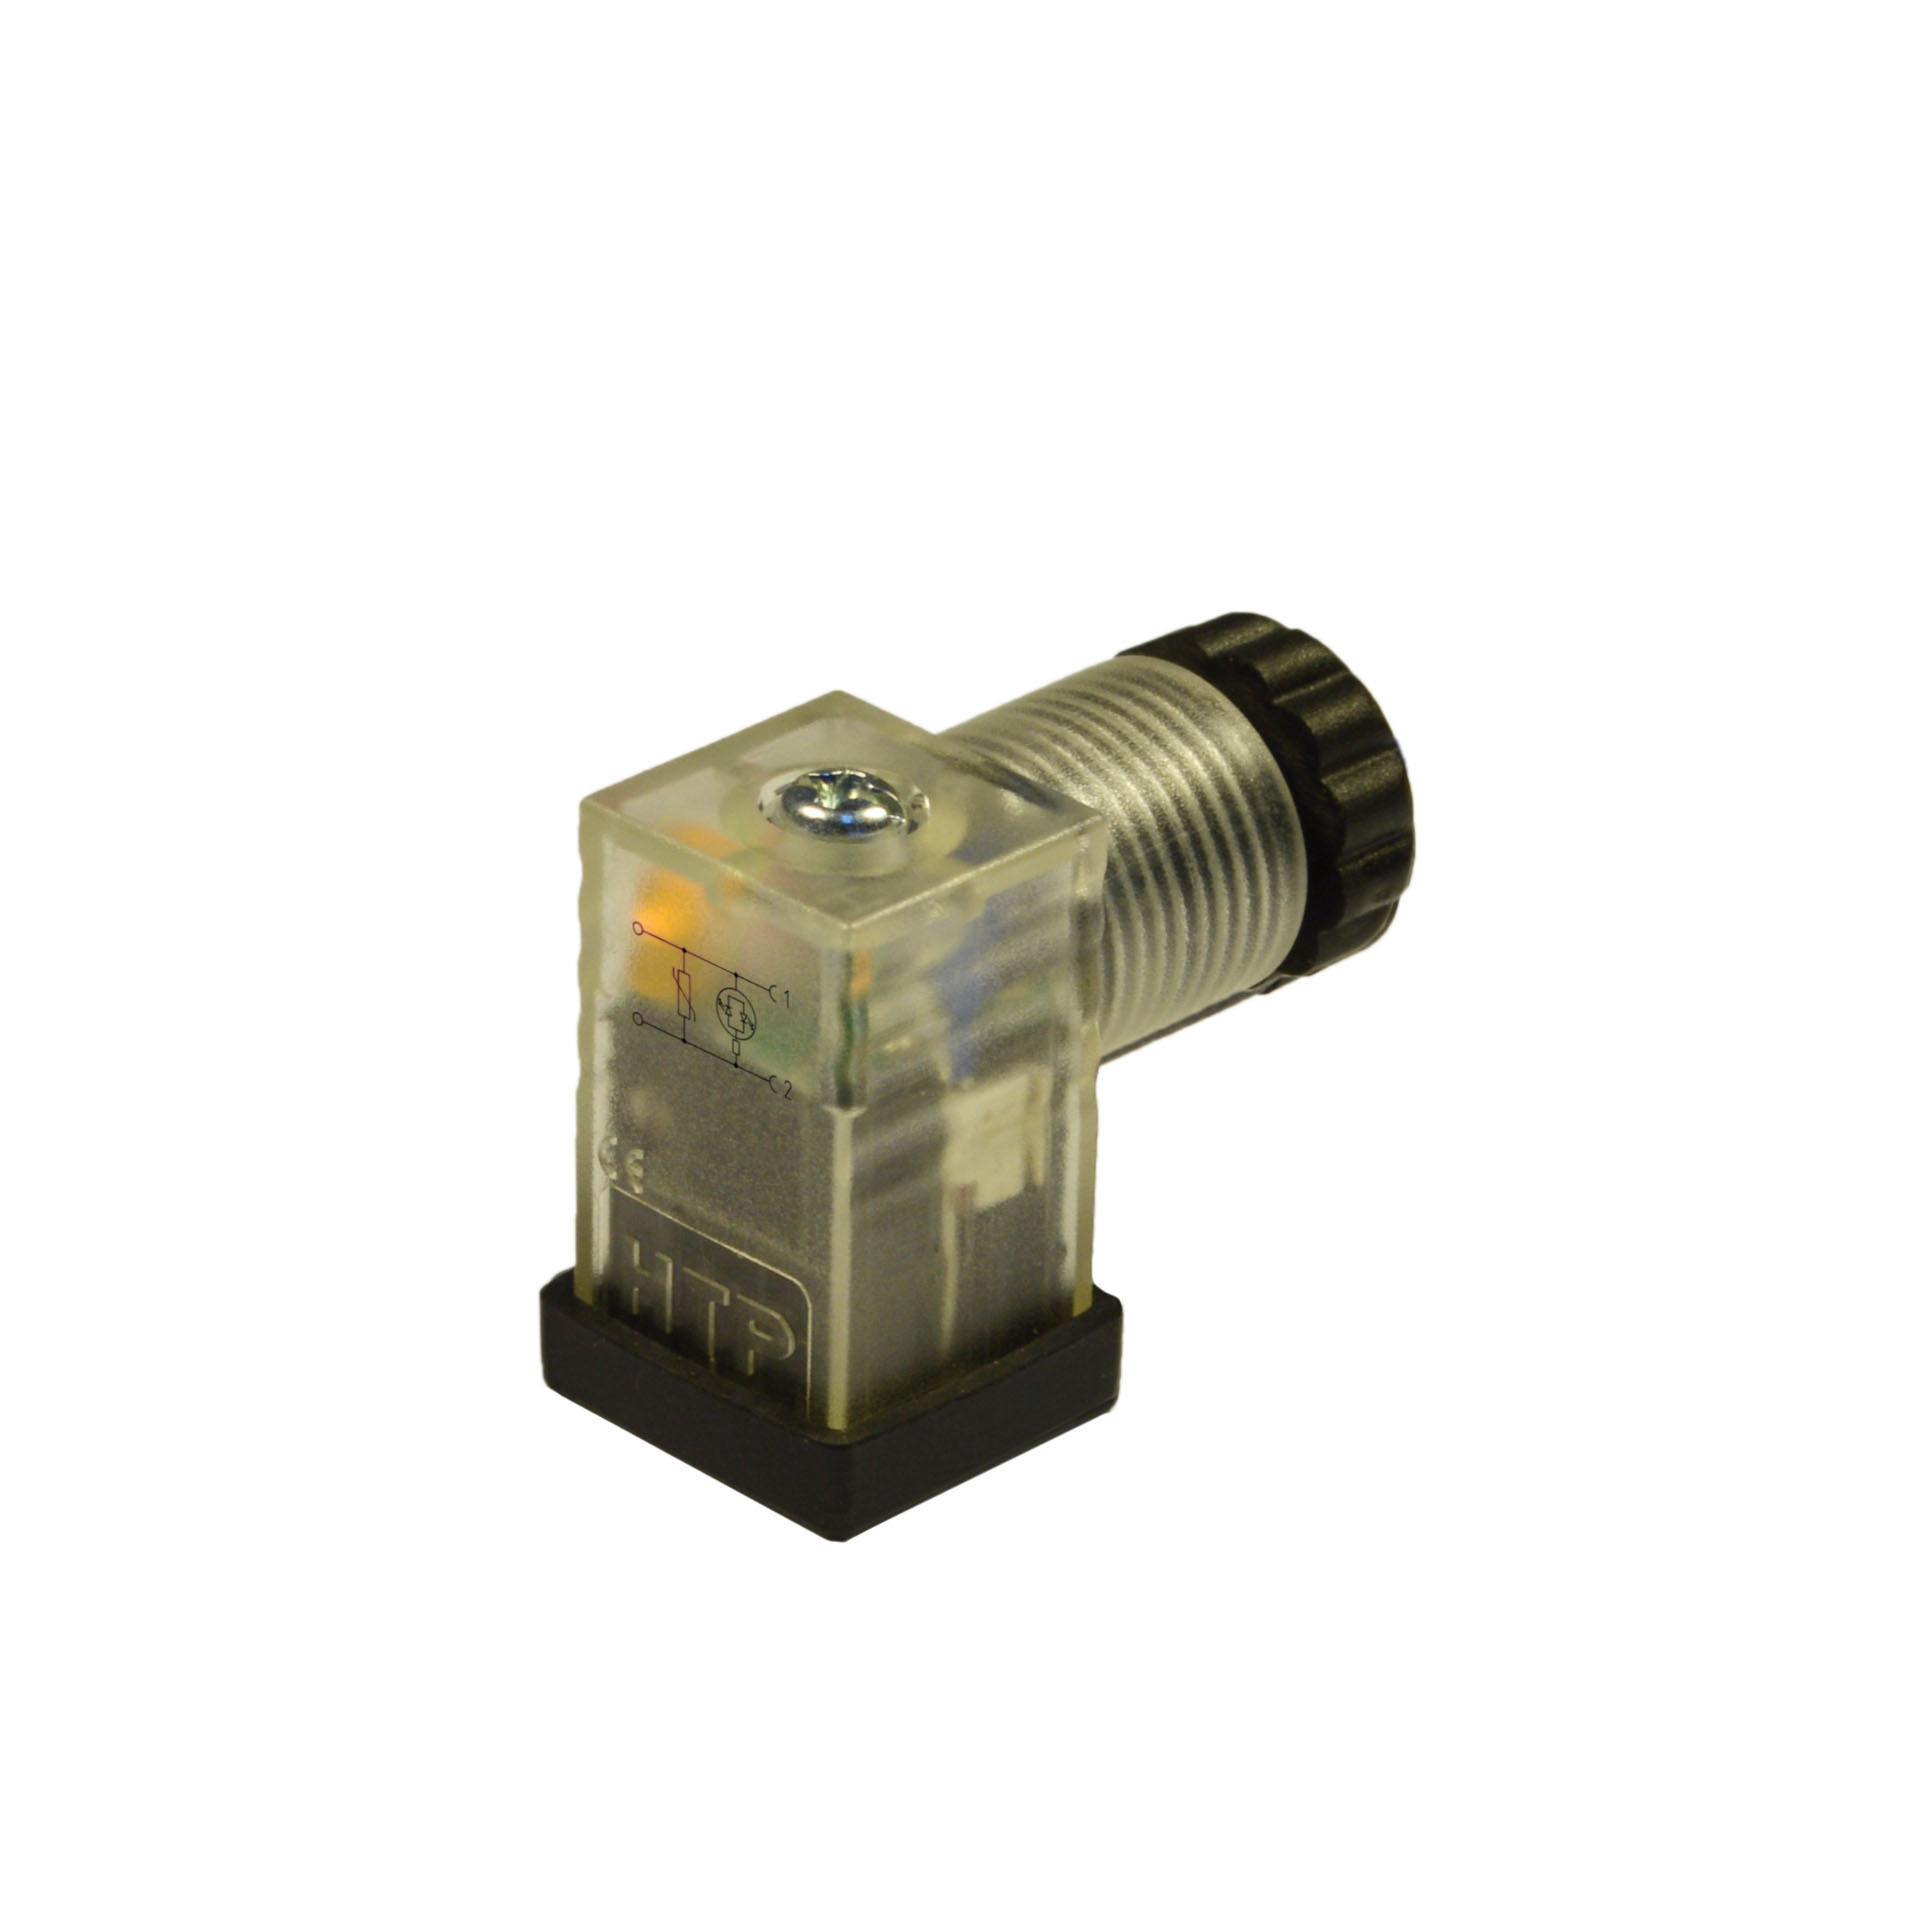 Industriale/C a cablare,2p+T(h.6),LED giallo+vdr,115VAC/DC,PG7